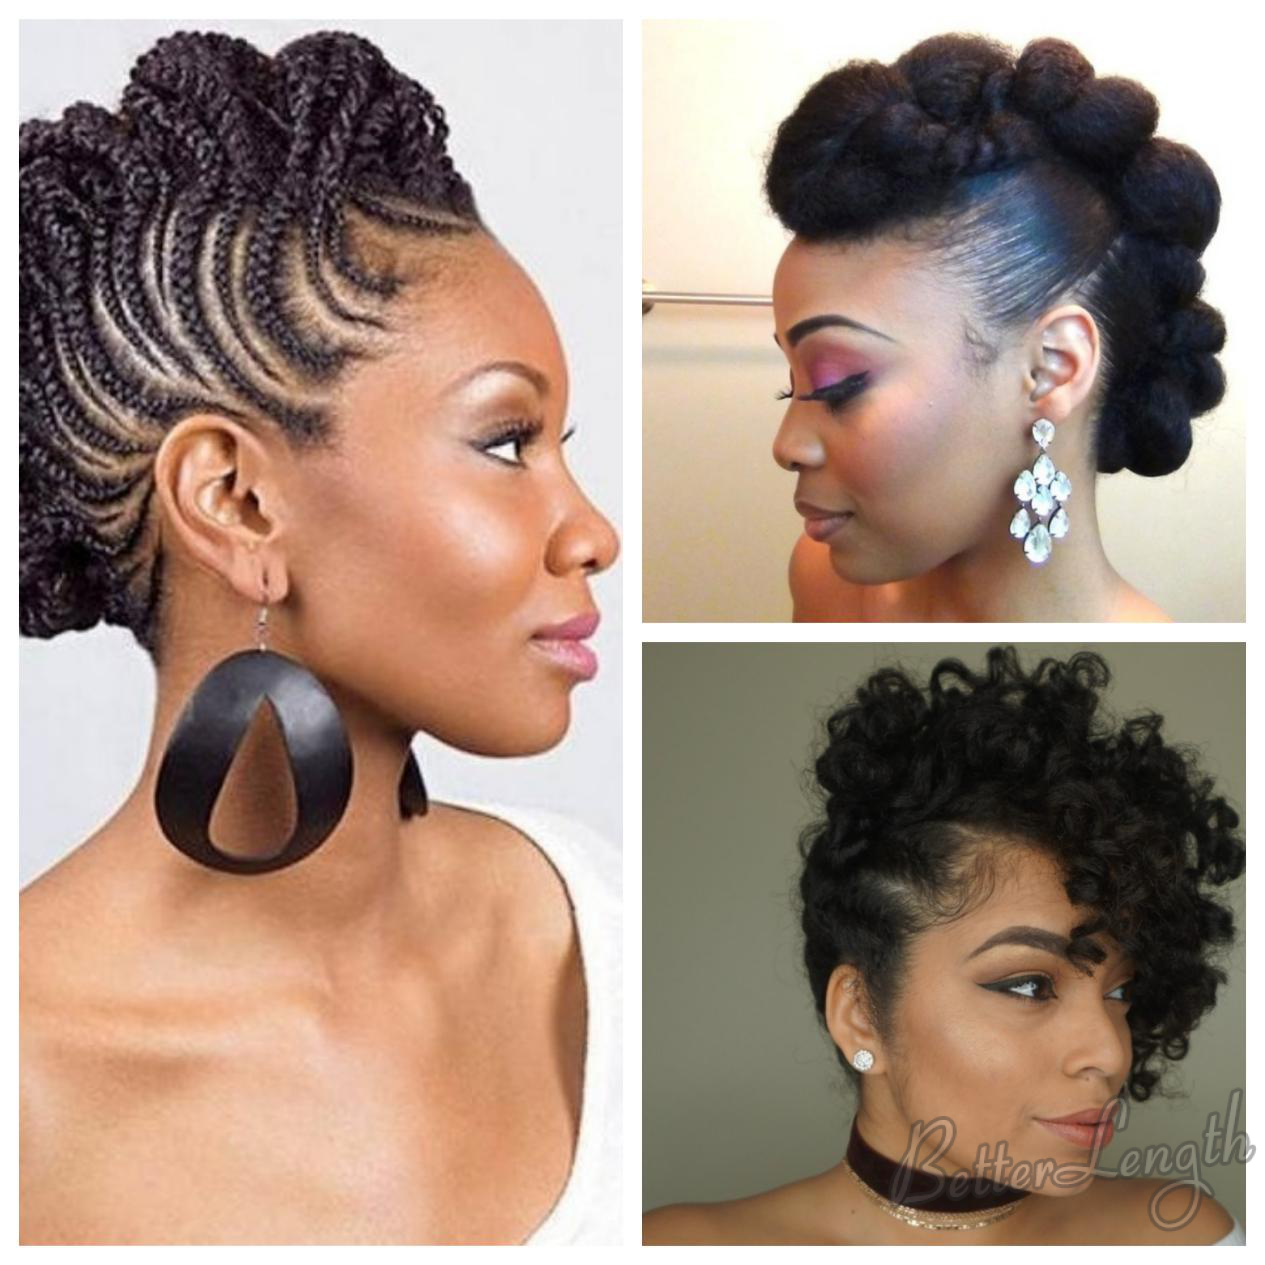 twist updo 2 - 7 Best Protective Hairstyles That Actually Protect Natural Hair for Black Women